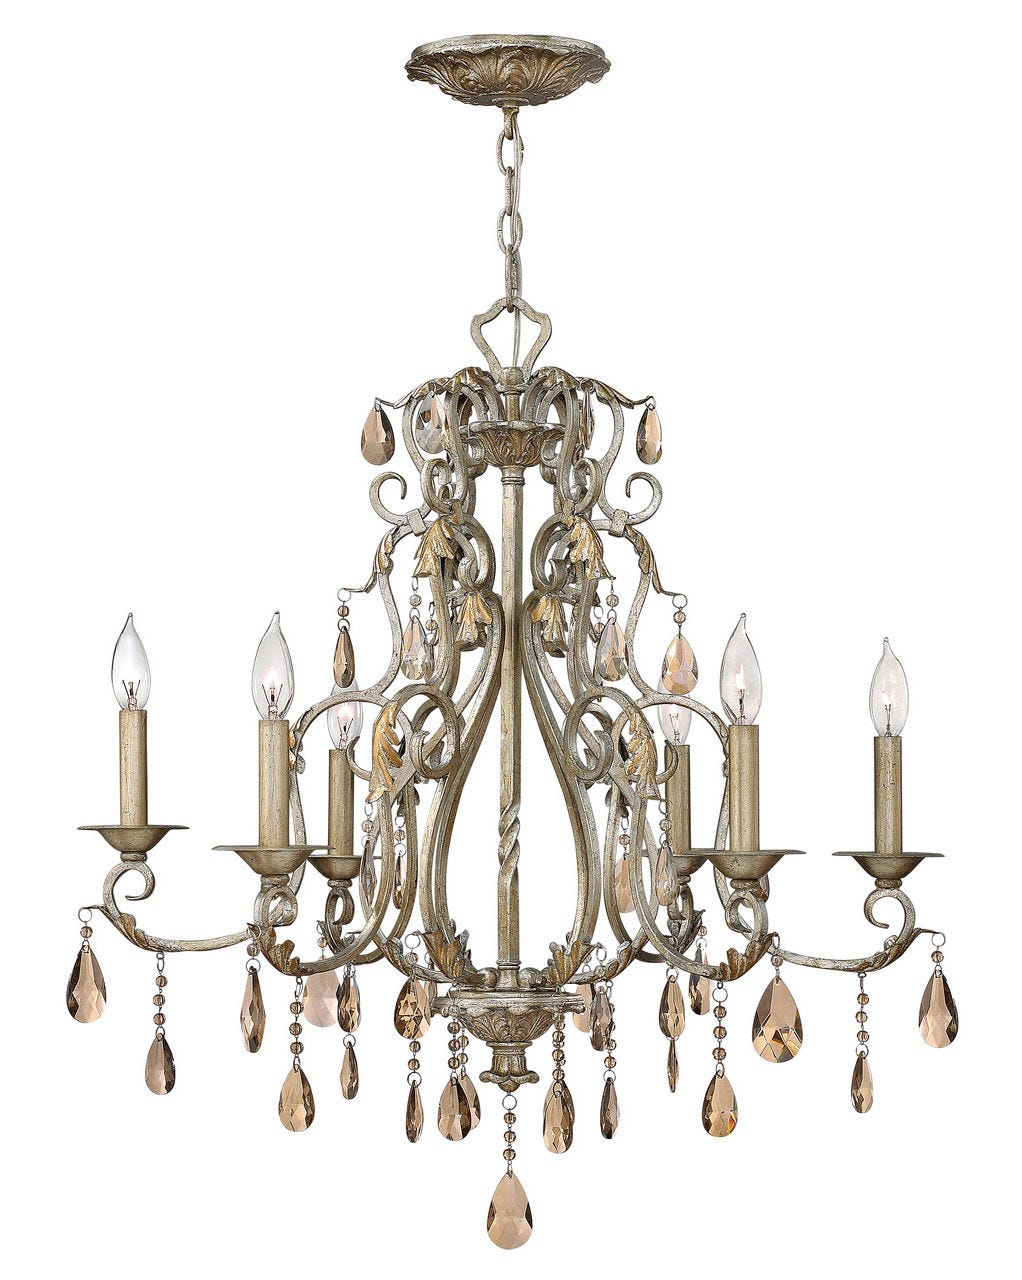 Hinkley Carlton Chandelier Collection